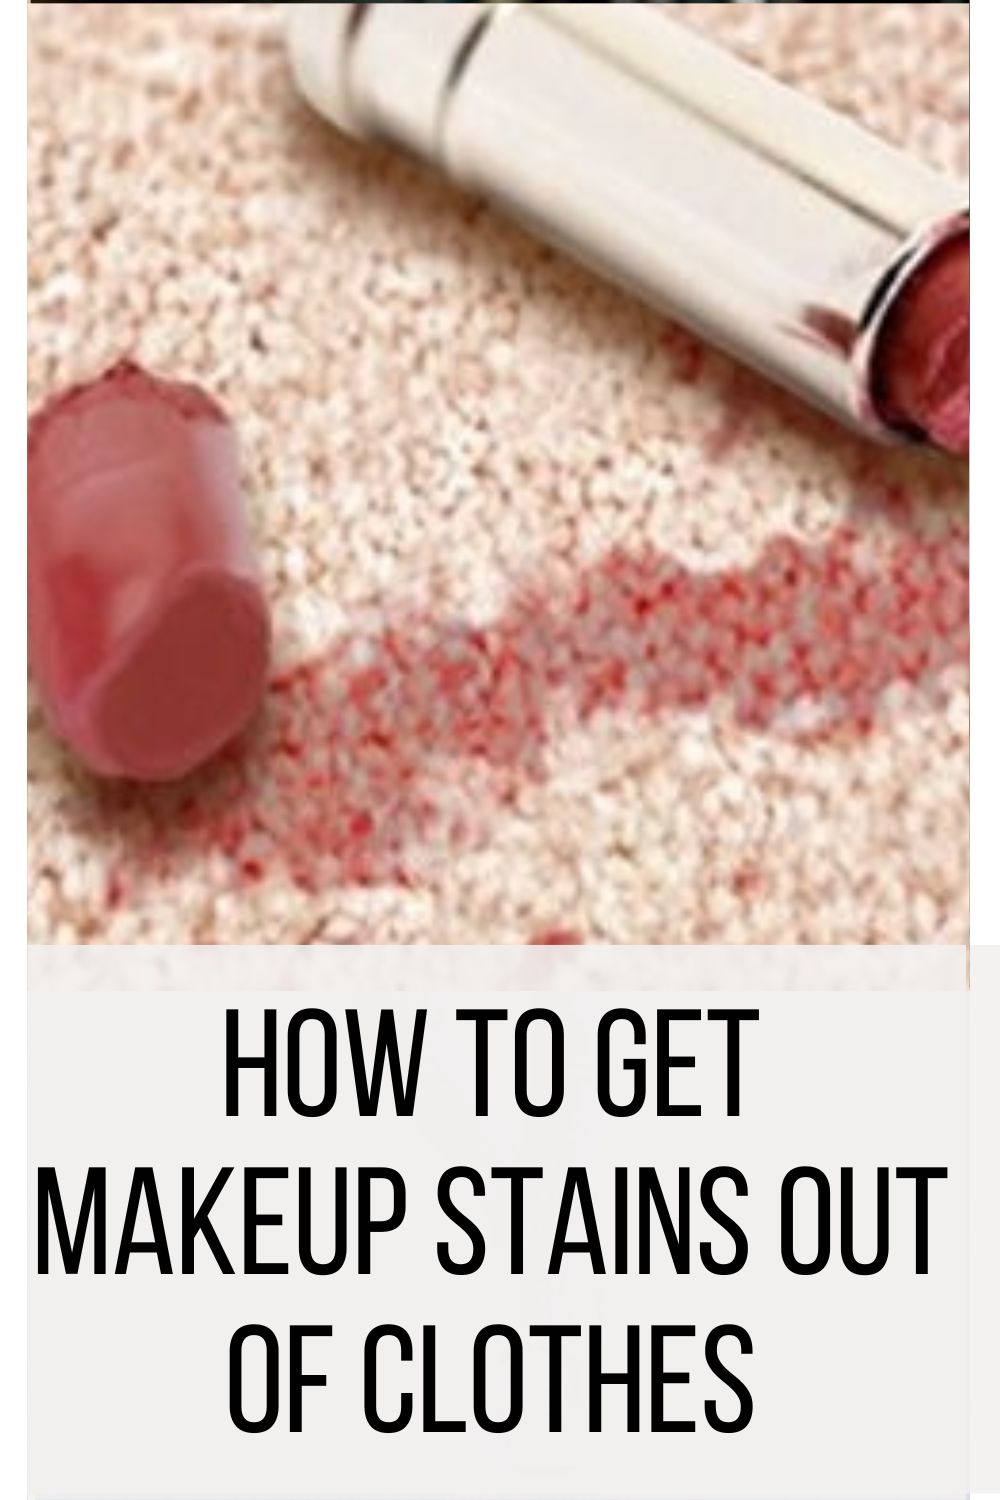 How To Get Makeup Stains Out of Clothes